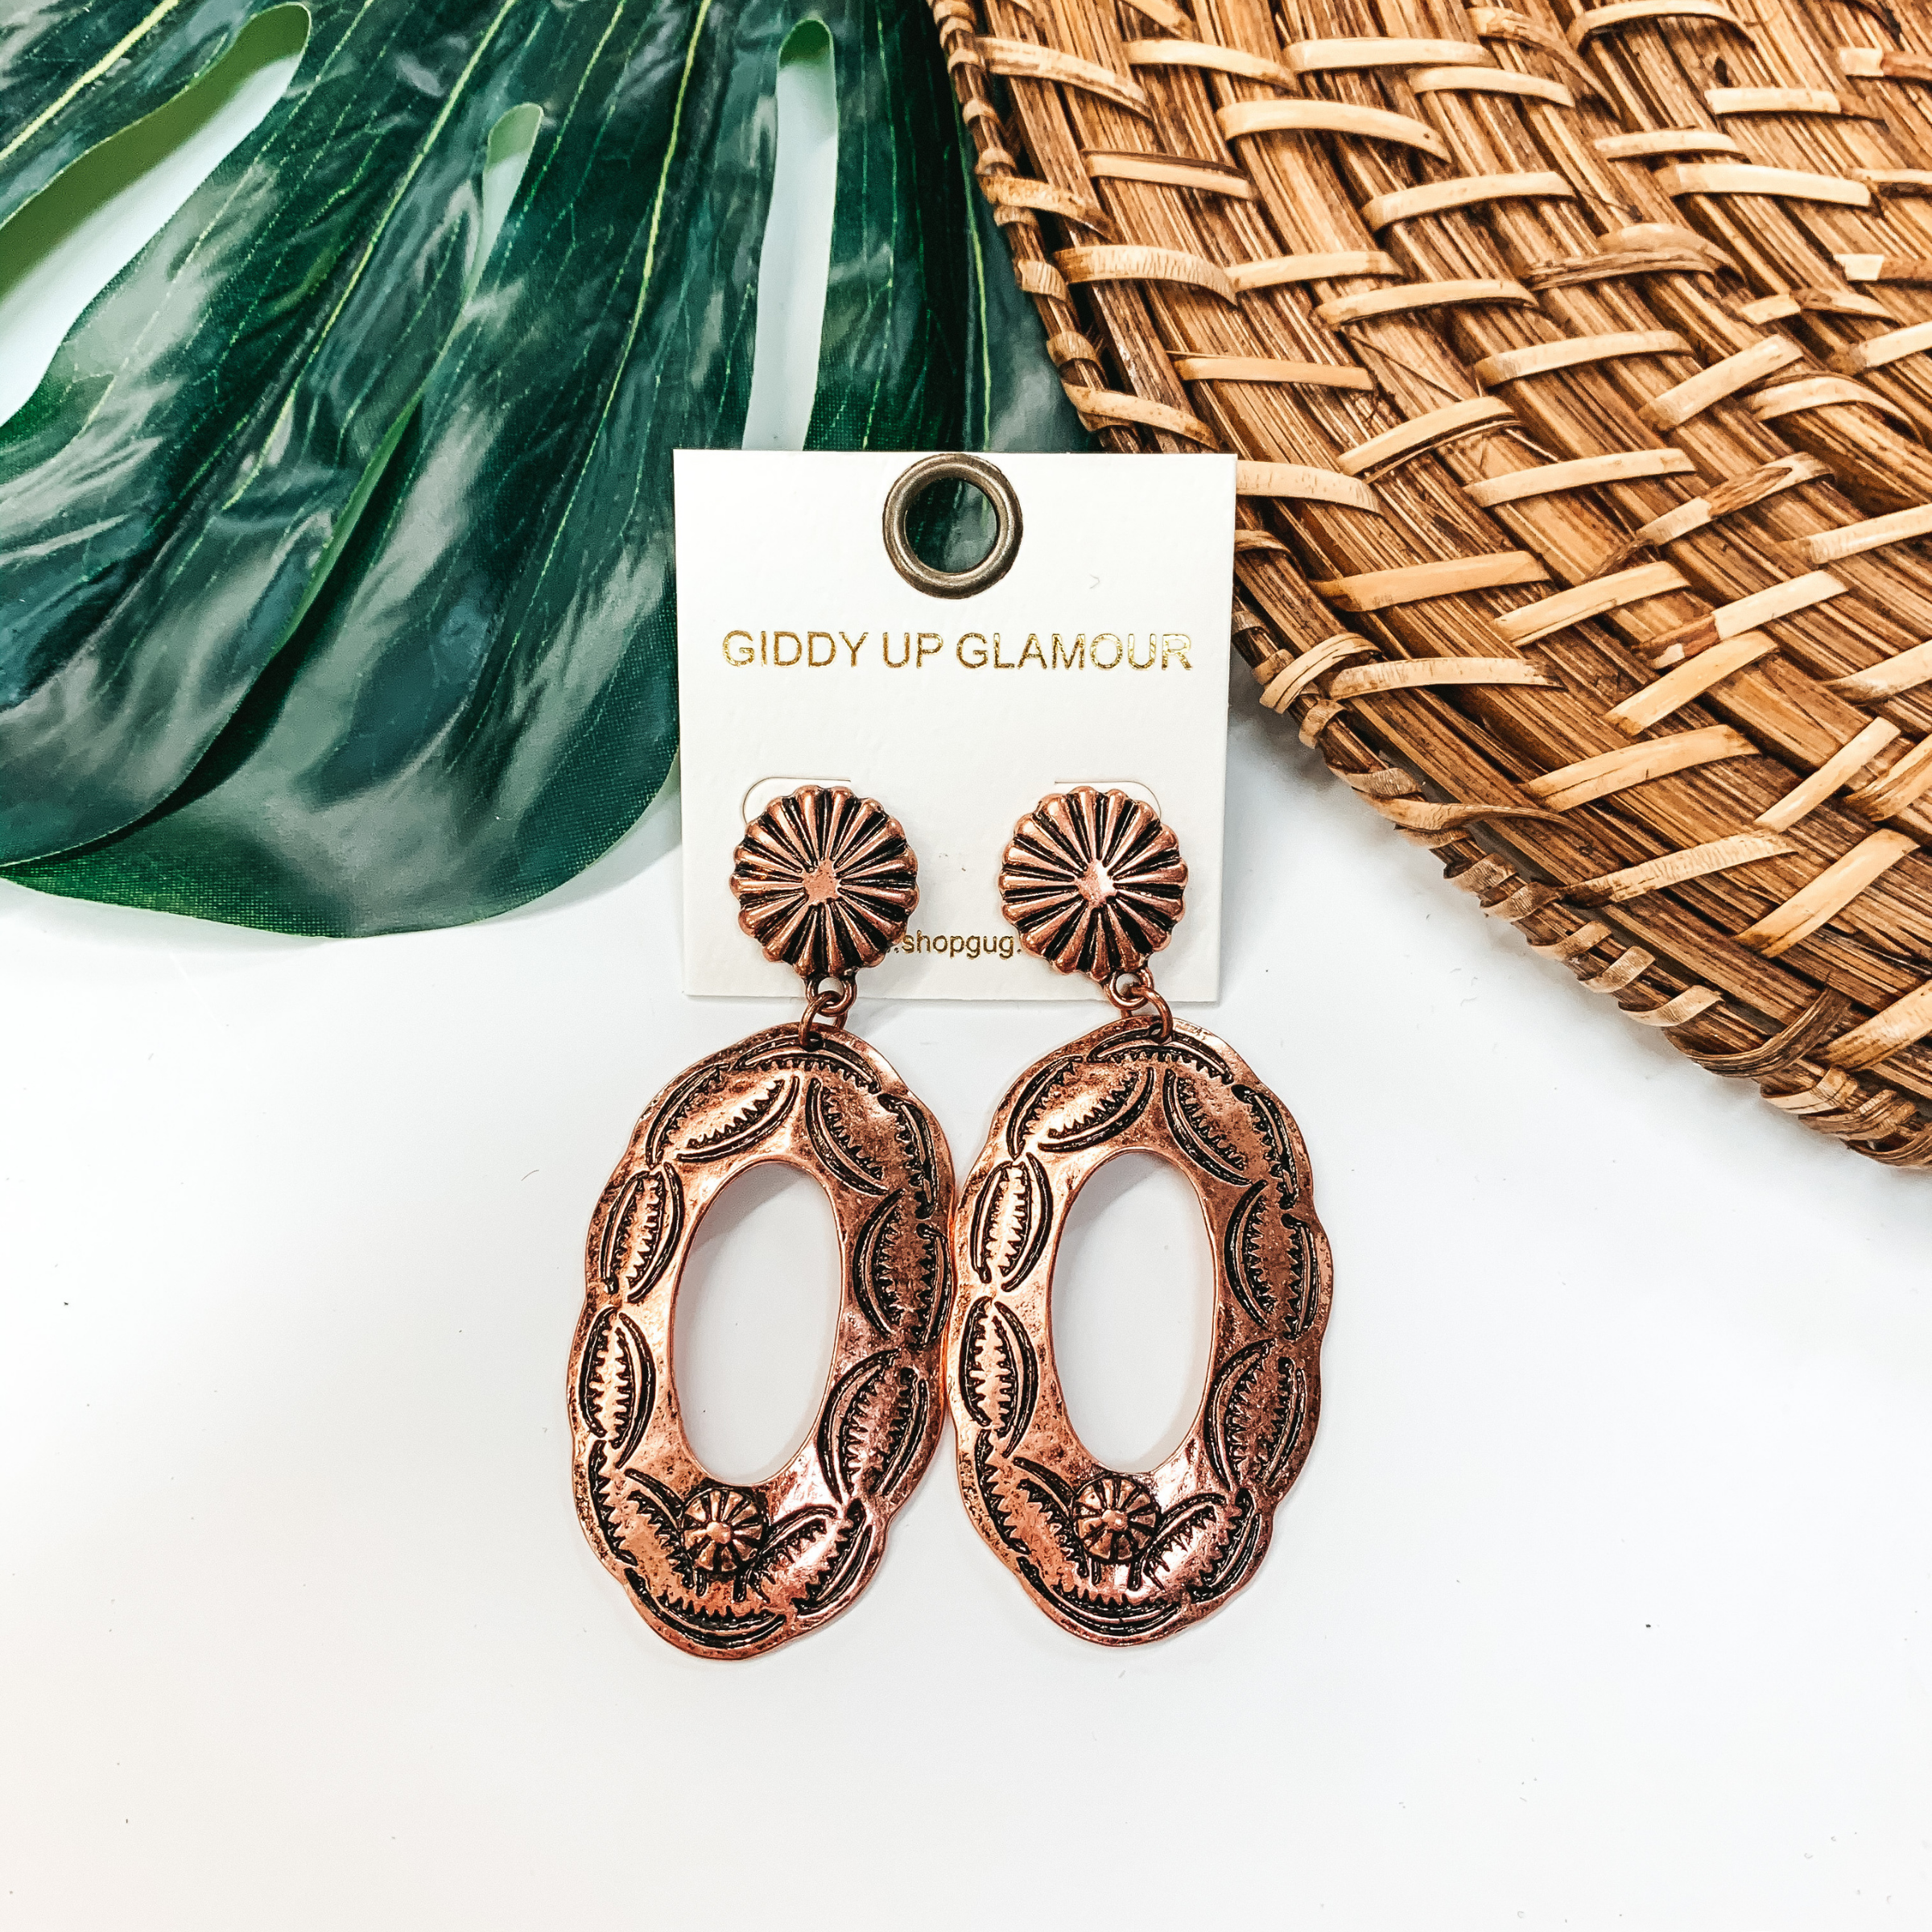 Oval Cutout Concho Post Earrings in Copper Tone - Giddy Up Glamour Boutique